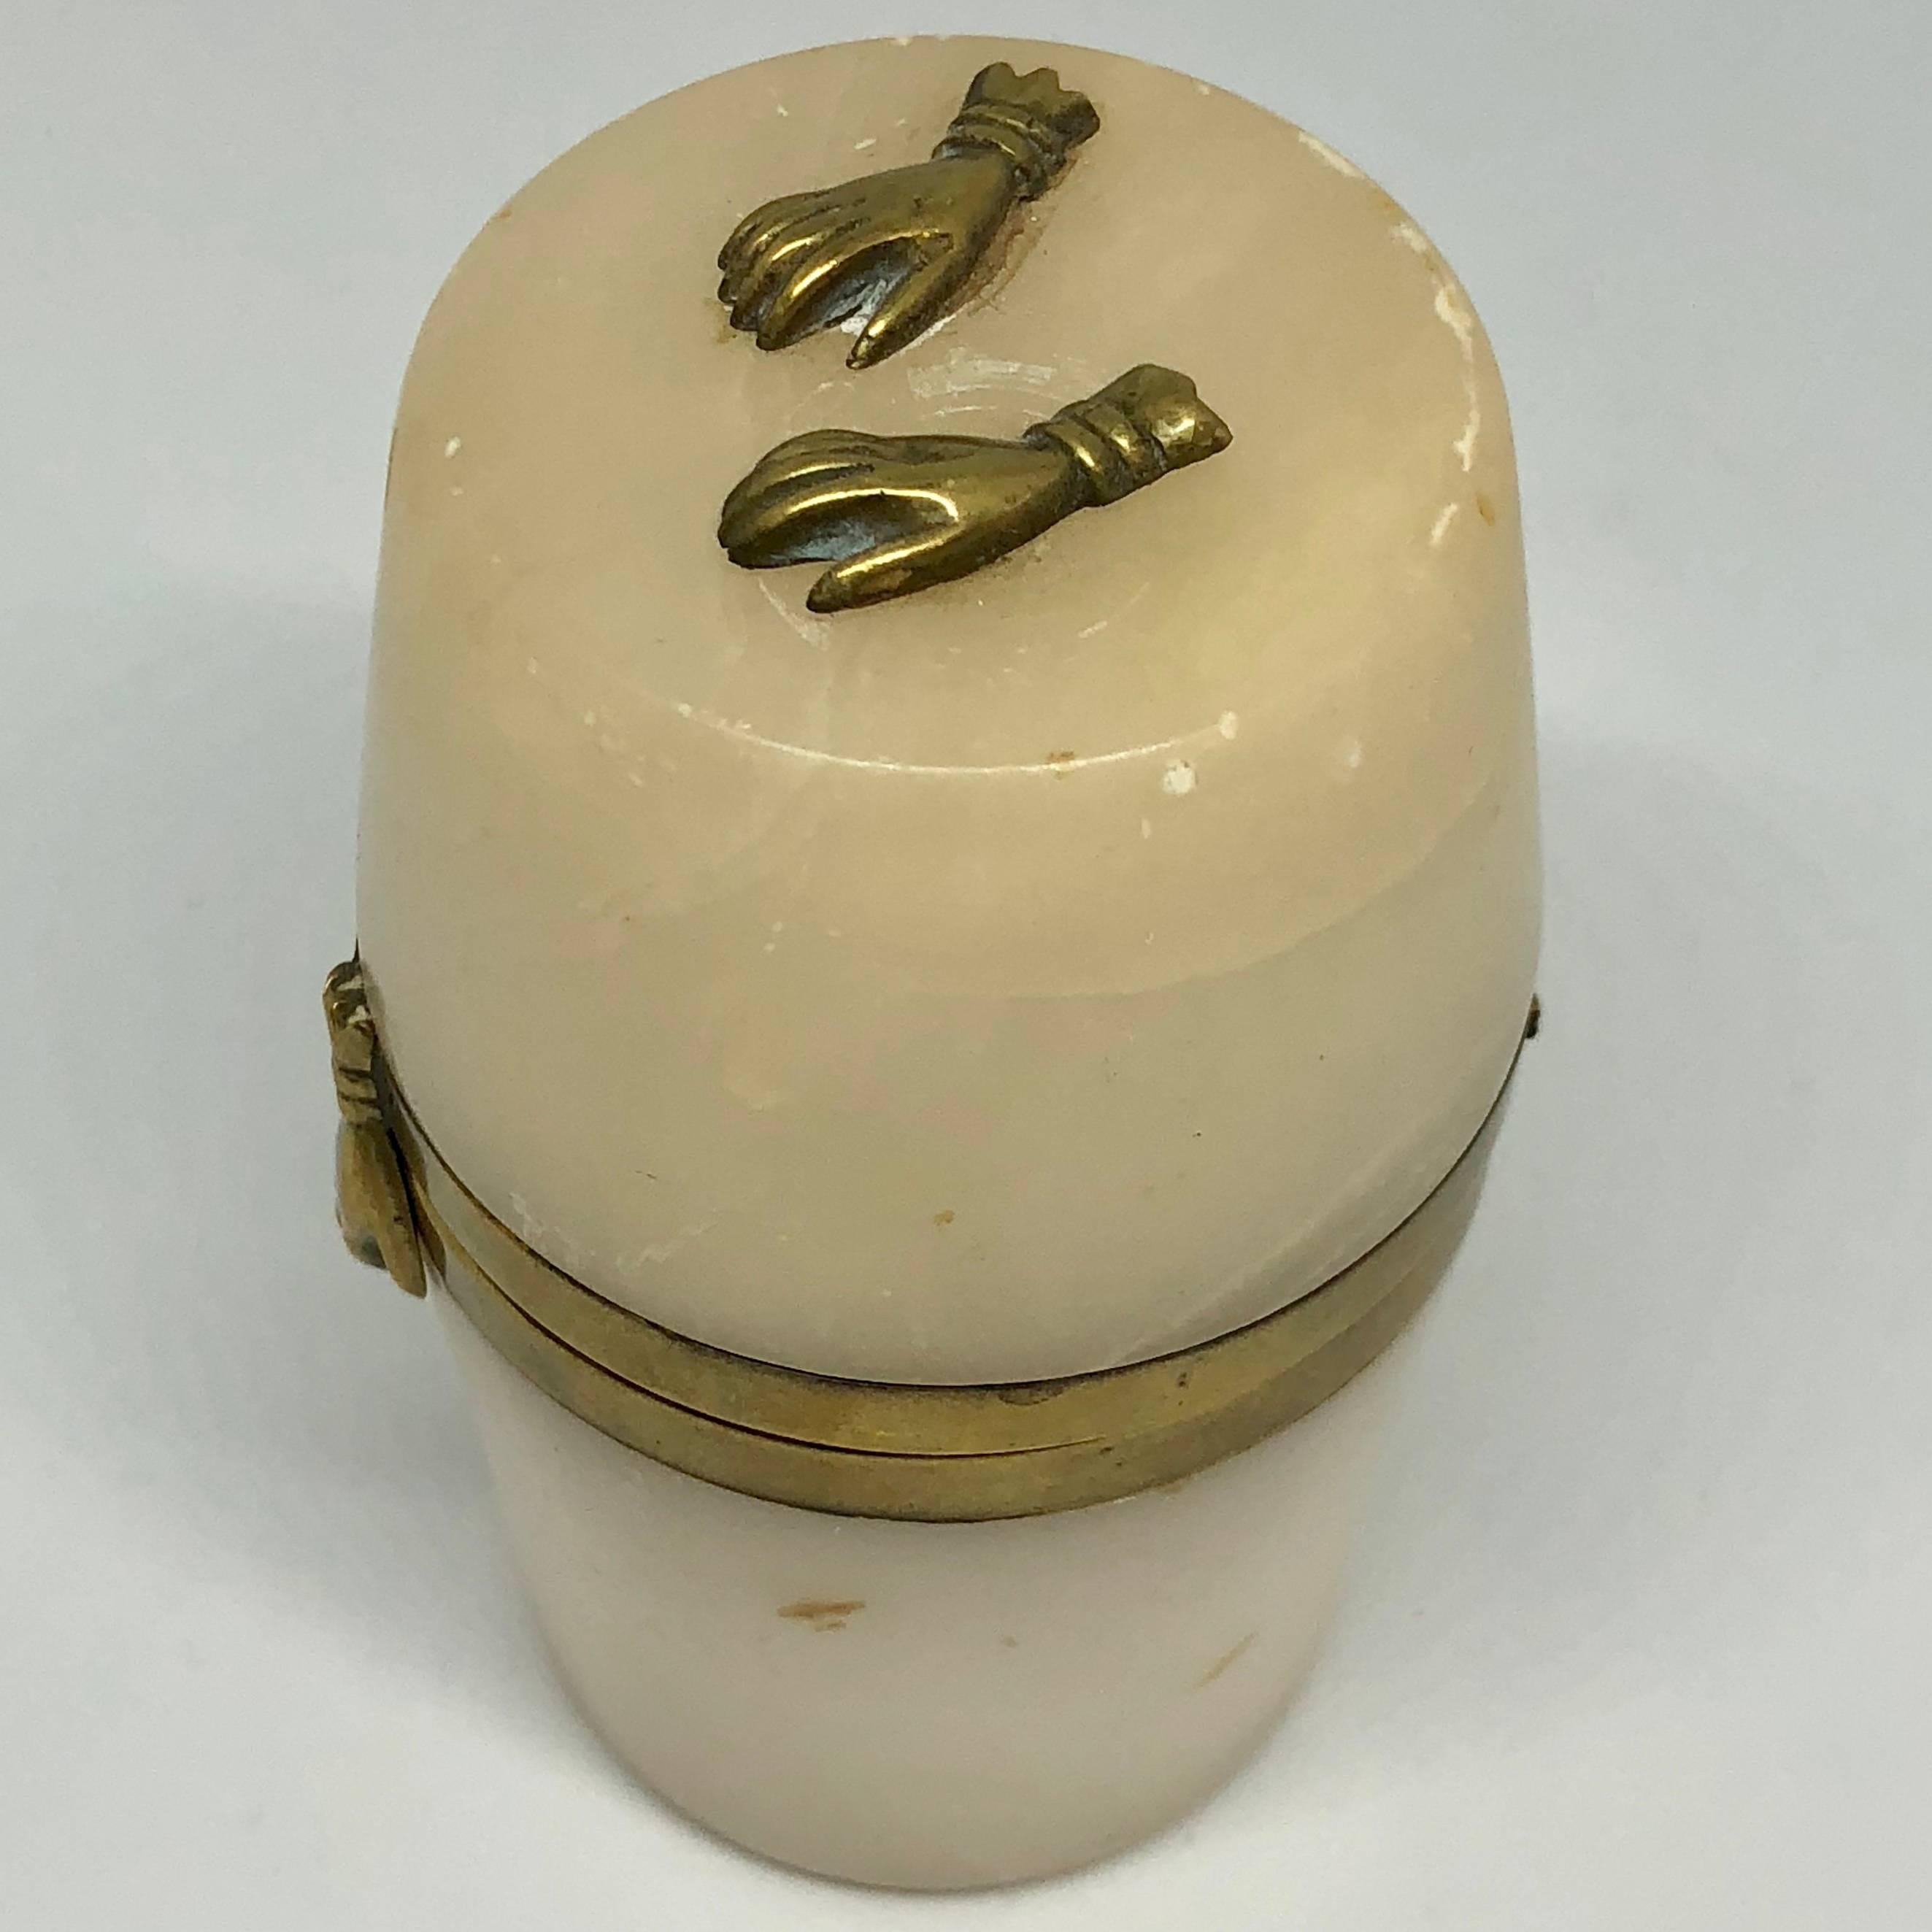 Small 18th Century Alabaster Barrel Shaped Jewelry Box W/ Brass Hands Decor For Sale 9